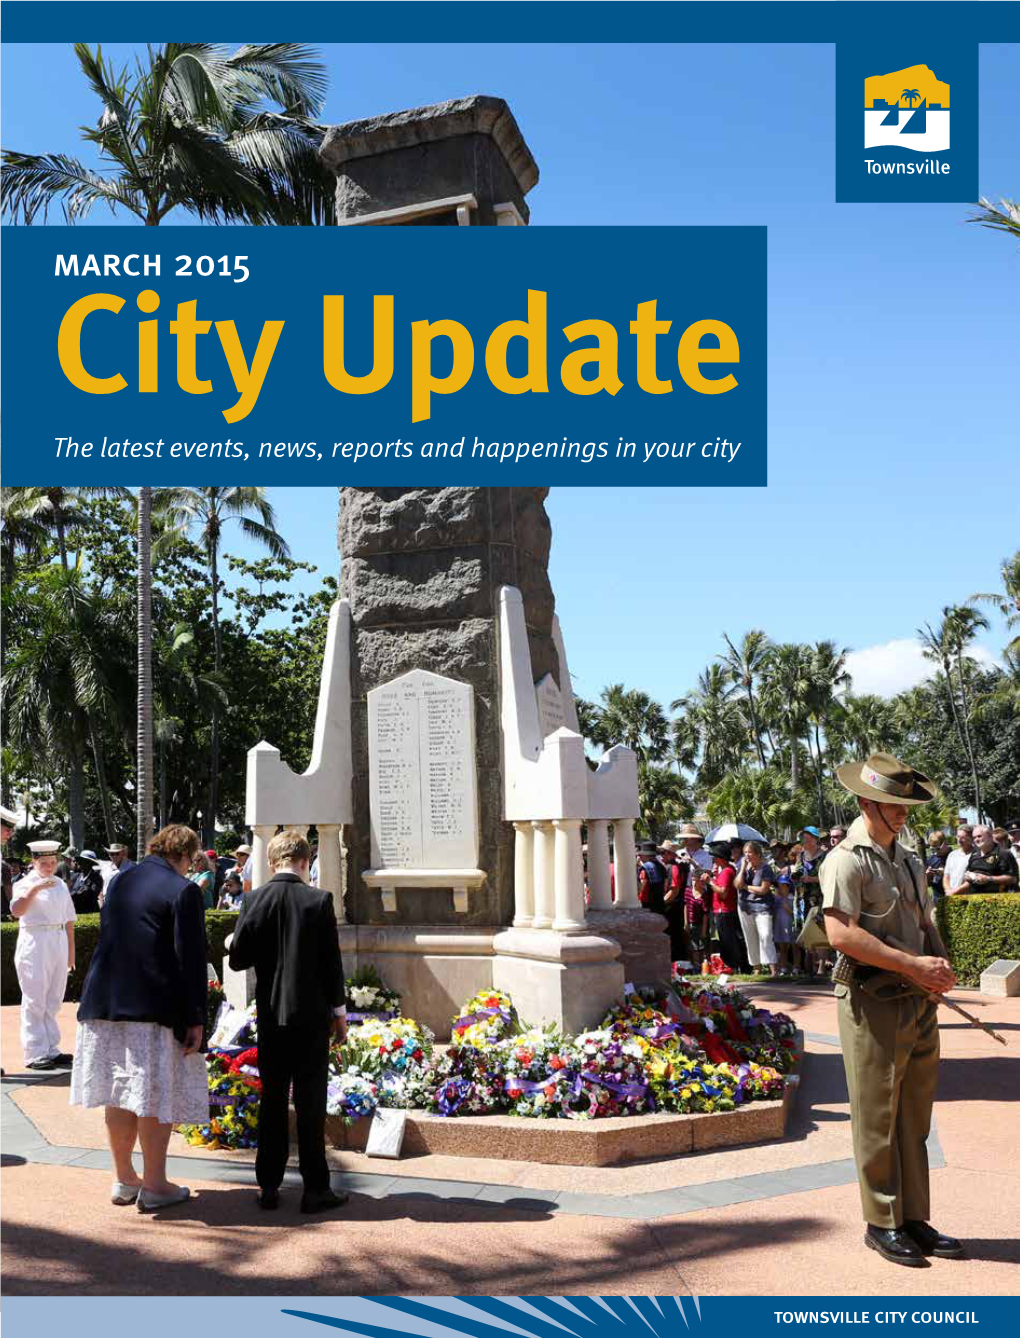 March 2015 City Update the Latest Events, News, Reports and Happenings in Your City Cityinformation